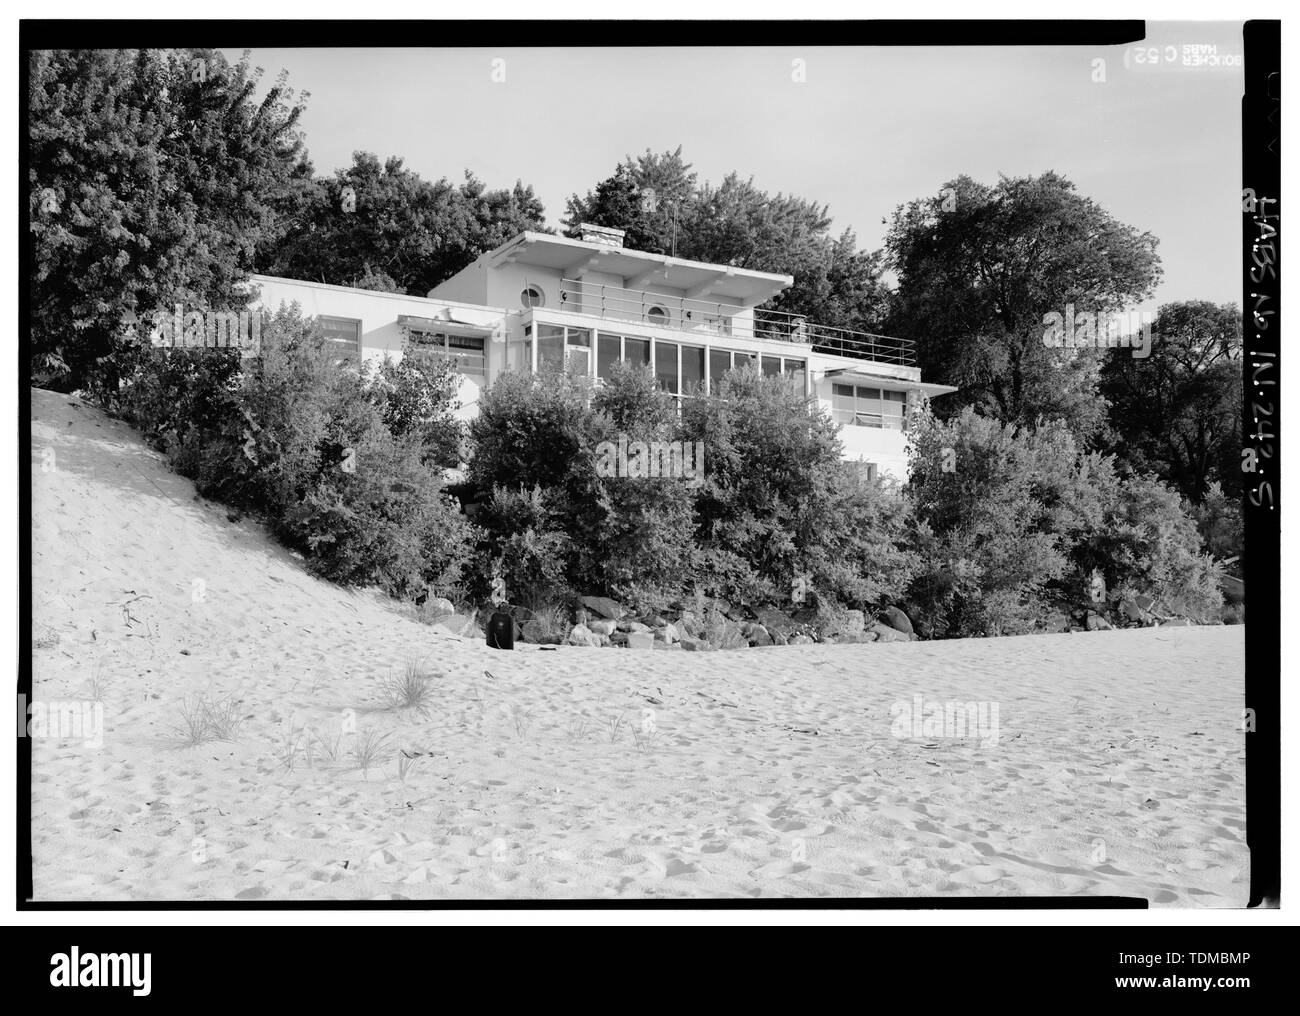 PERSPECTIVE VIEW FROM NORTHEAST - Florida Tropical House, 250 Lake Front Drive (moved from Chicago, IL), Beverly Shores, Porter County, IN; Weed, Robert Law; Pasit and Steward; Thorsch, Marjorie; Kuhne, James S; Goodman, Percival Stock Photo